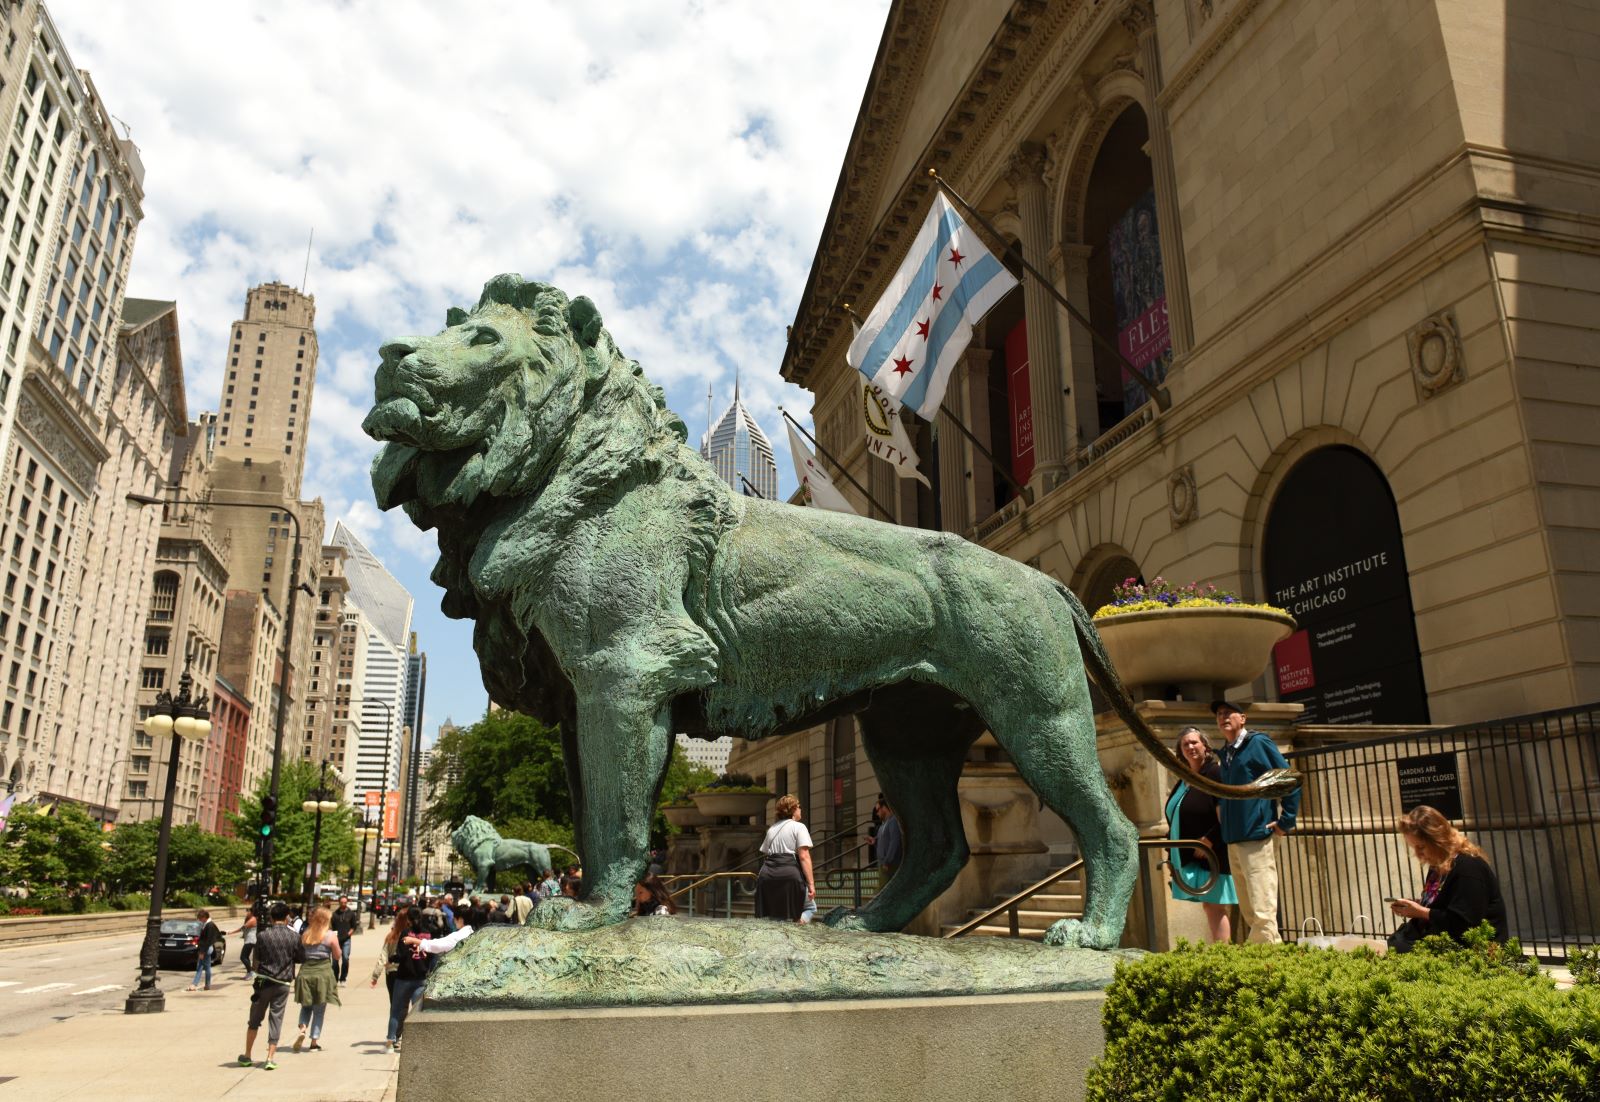 Image credit: Shutterstock / Bumble Dee <p>Chicago’s museums are world-class and, on certain days, they offer free admission. Tip: Check out city passes that offer discounts on multiple attractions.</p>